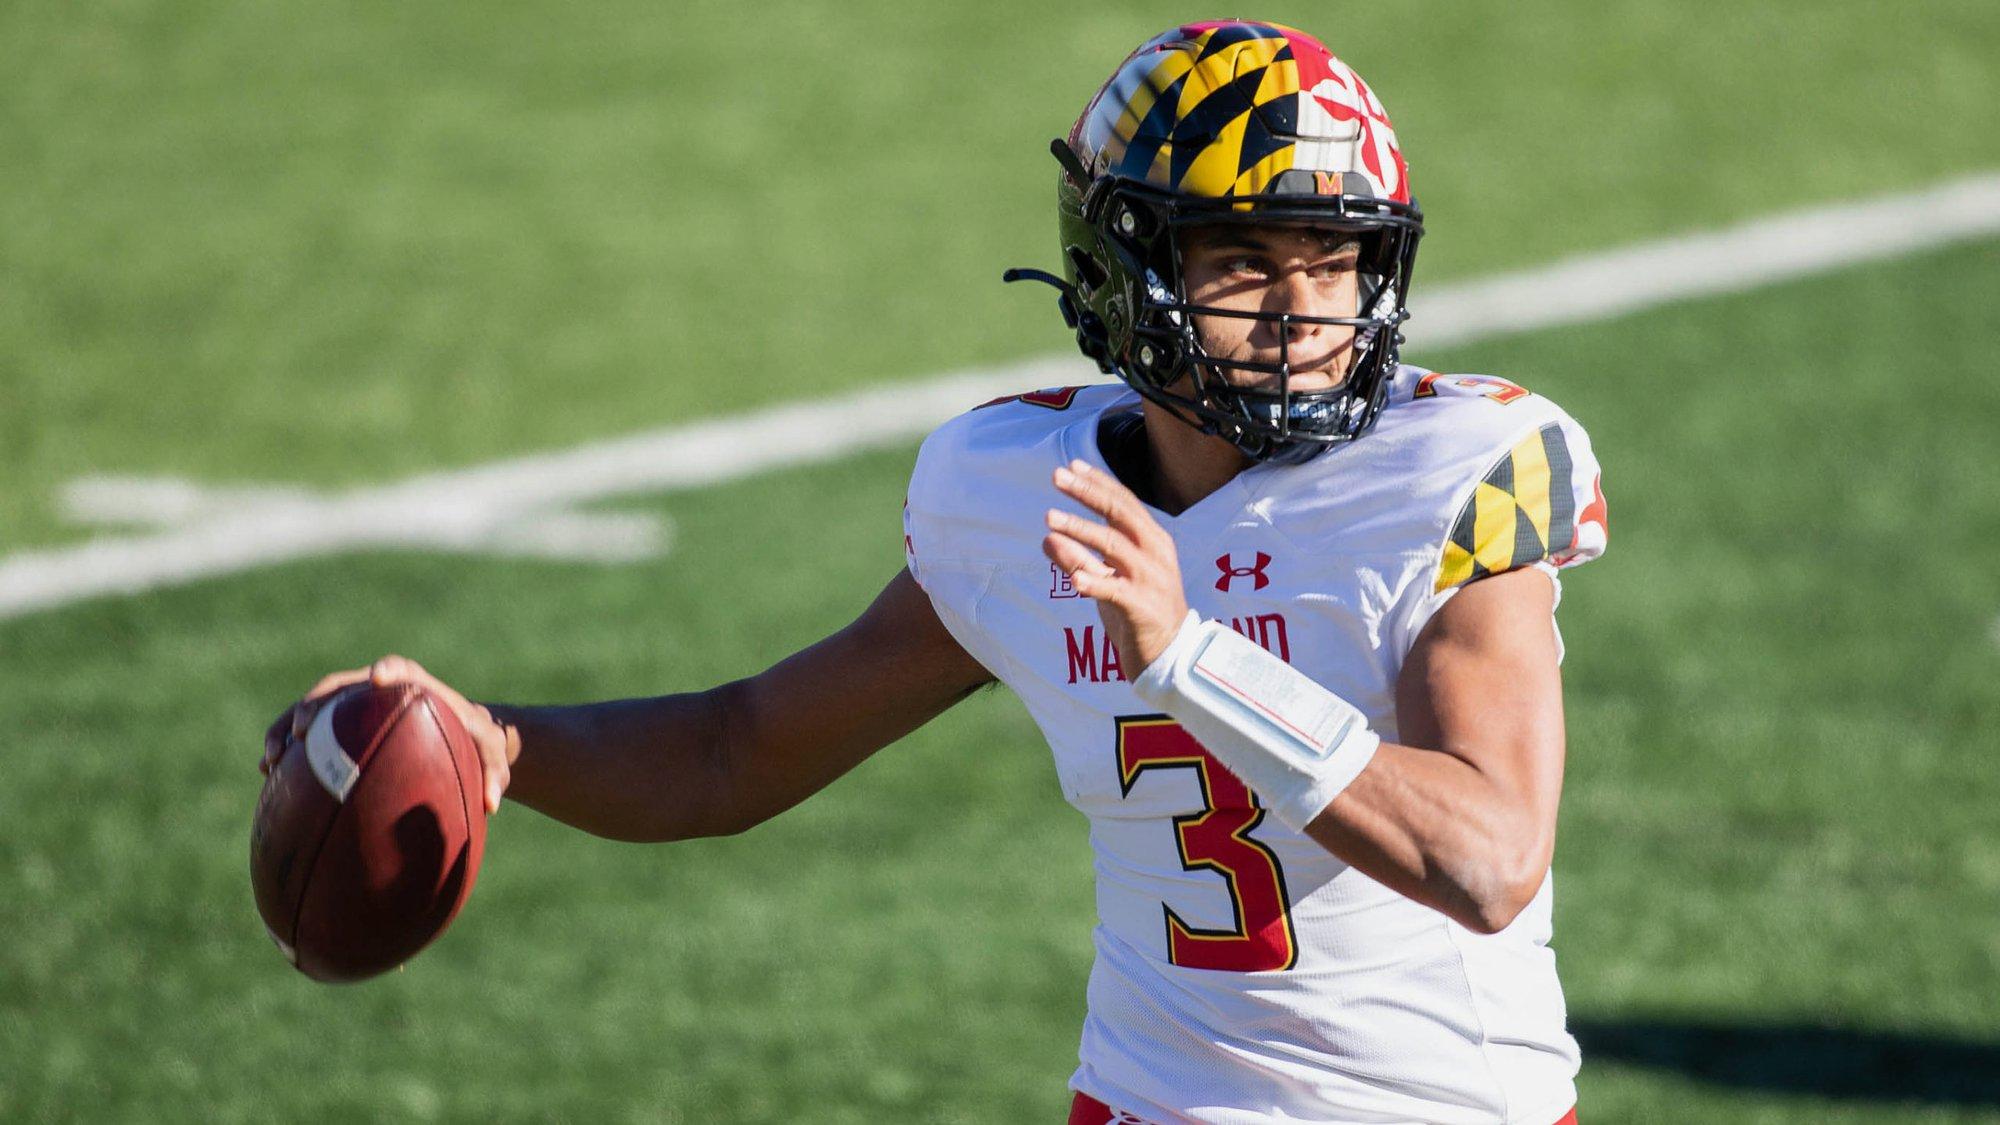 Iowa Hawkeyes vs Maryland Terrapins Betting Preview: Upset-Minded Maryland Looks to Give Iowa a Friday Night Fright